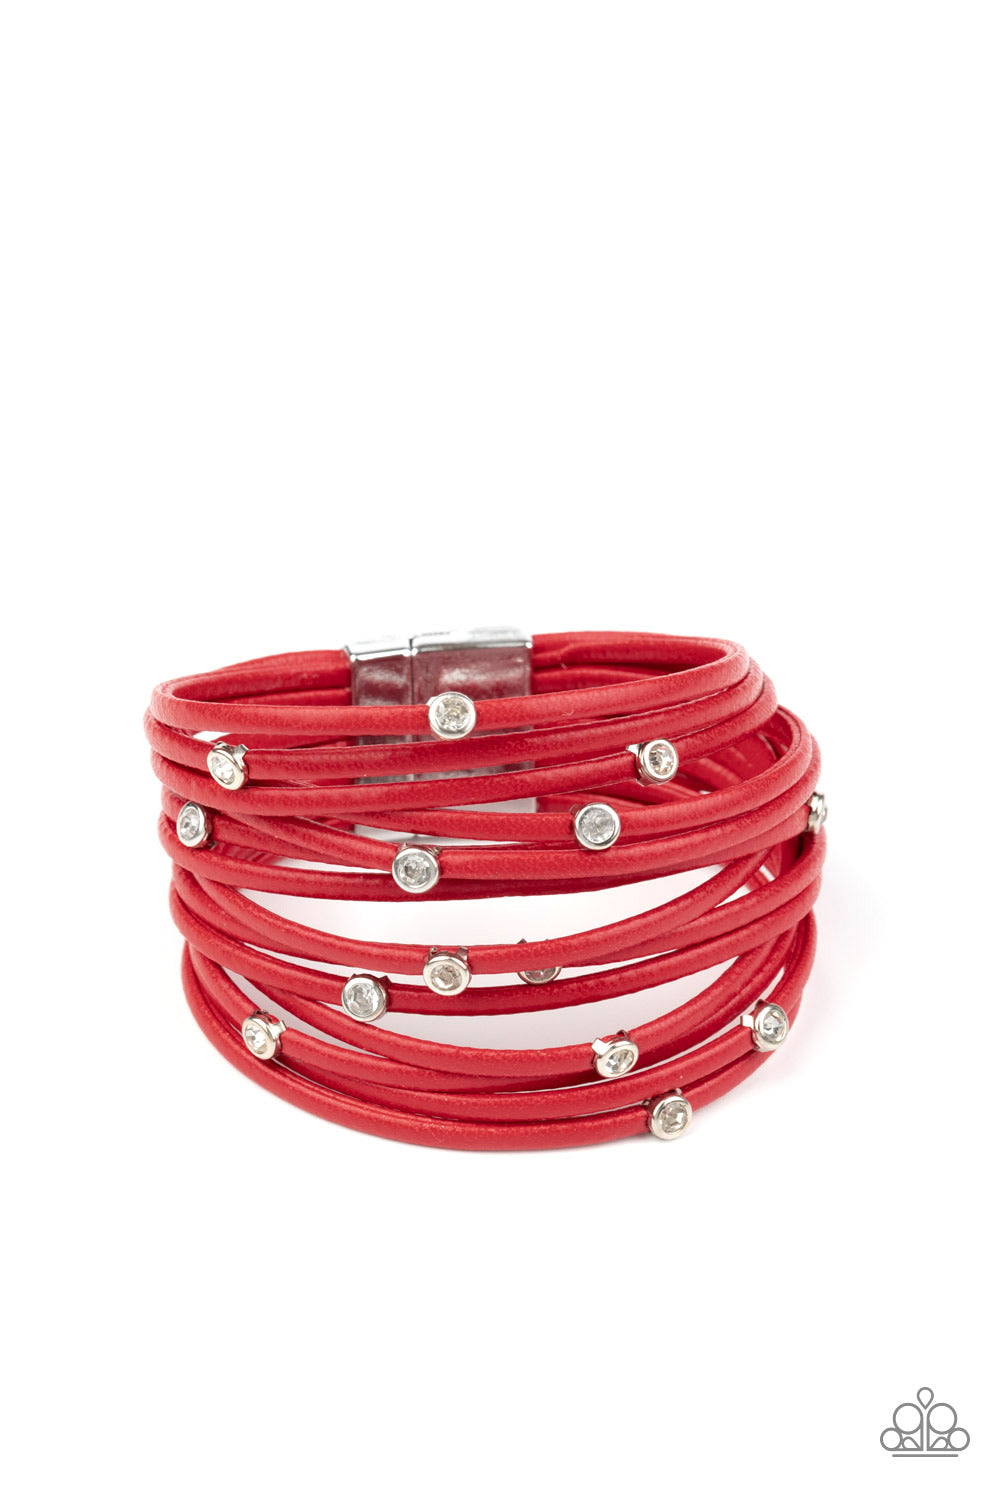 Fearlessly Layered- Red